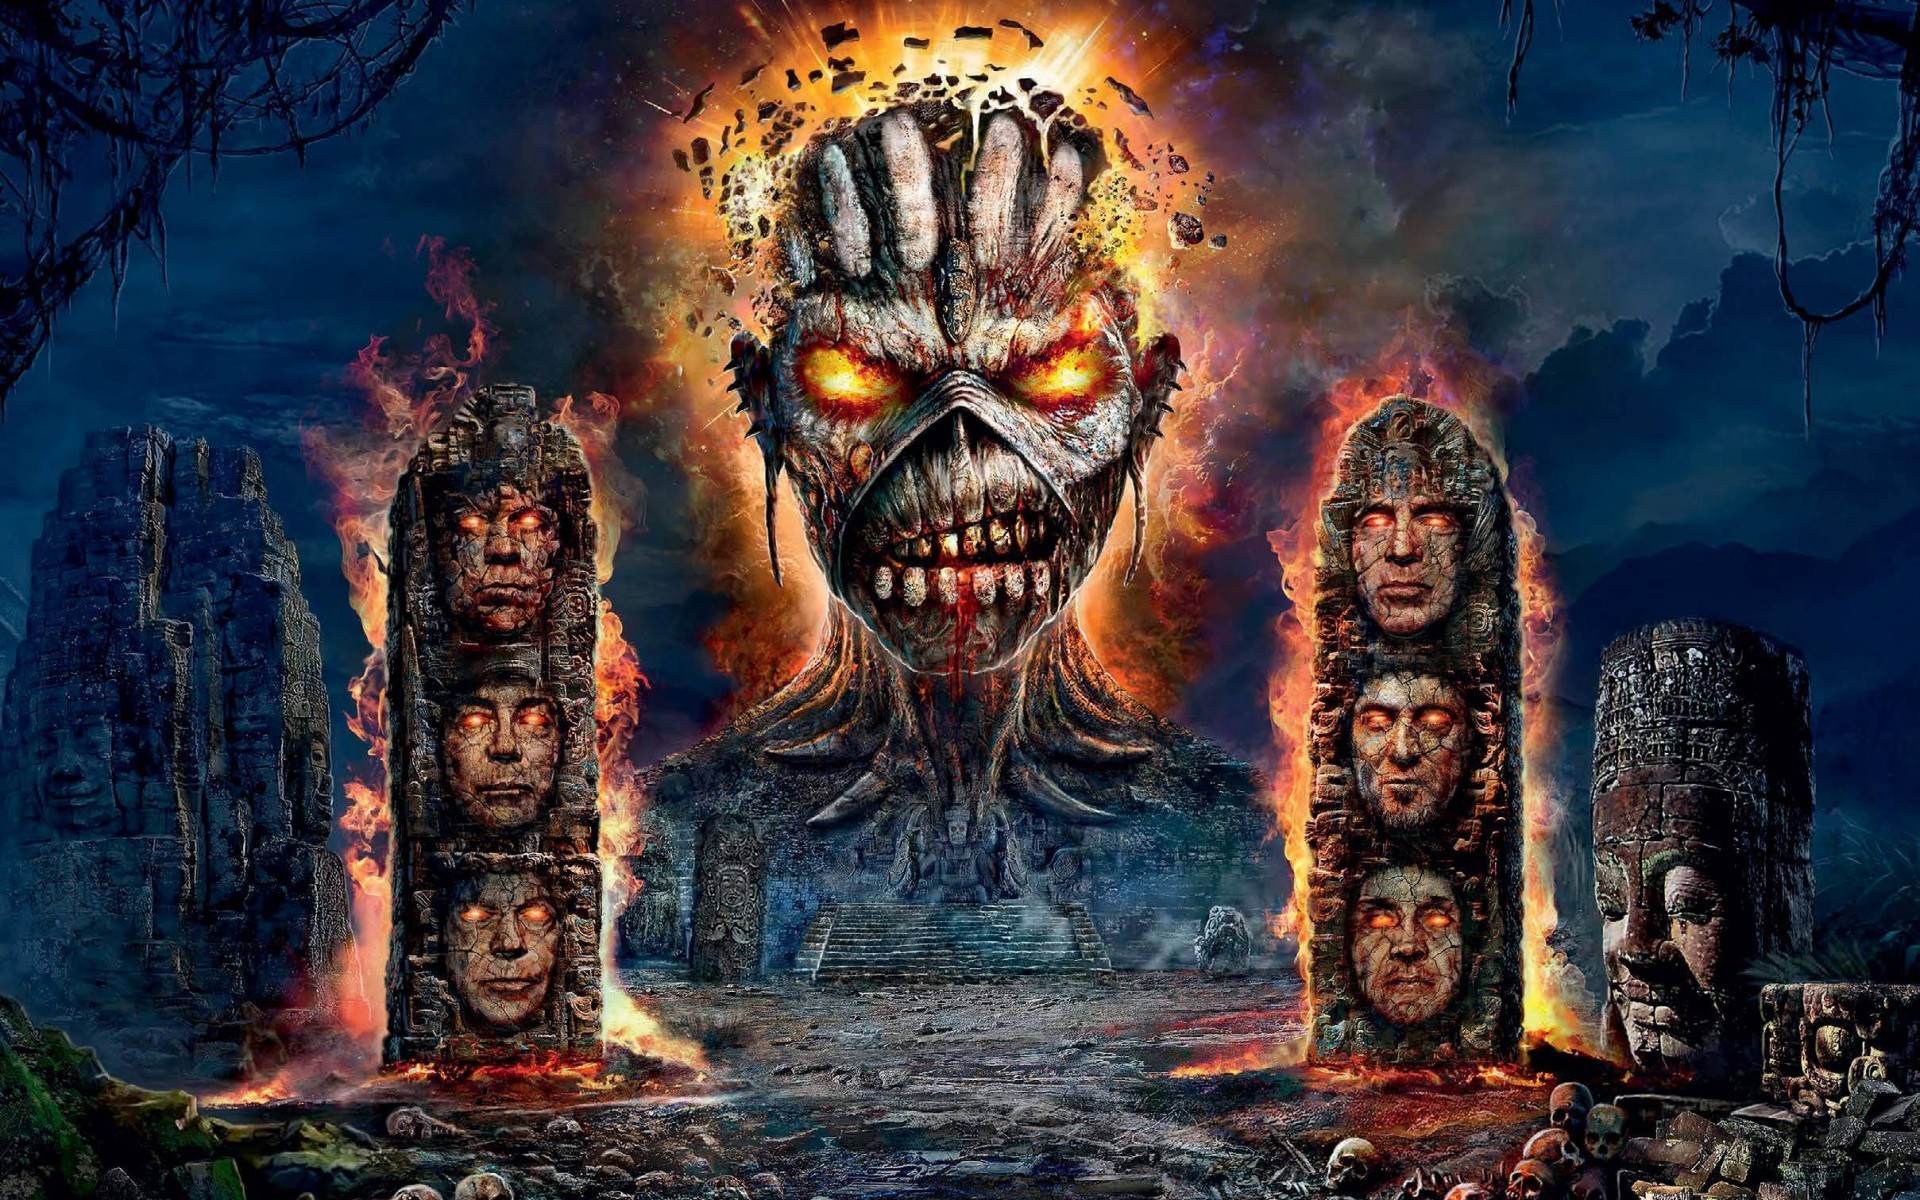 1920x1200 Iron Maiden English Heavy Metal Band | 1920 x 1200 | Download | Close